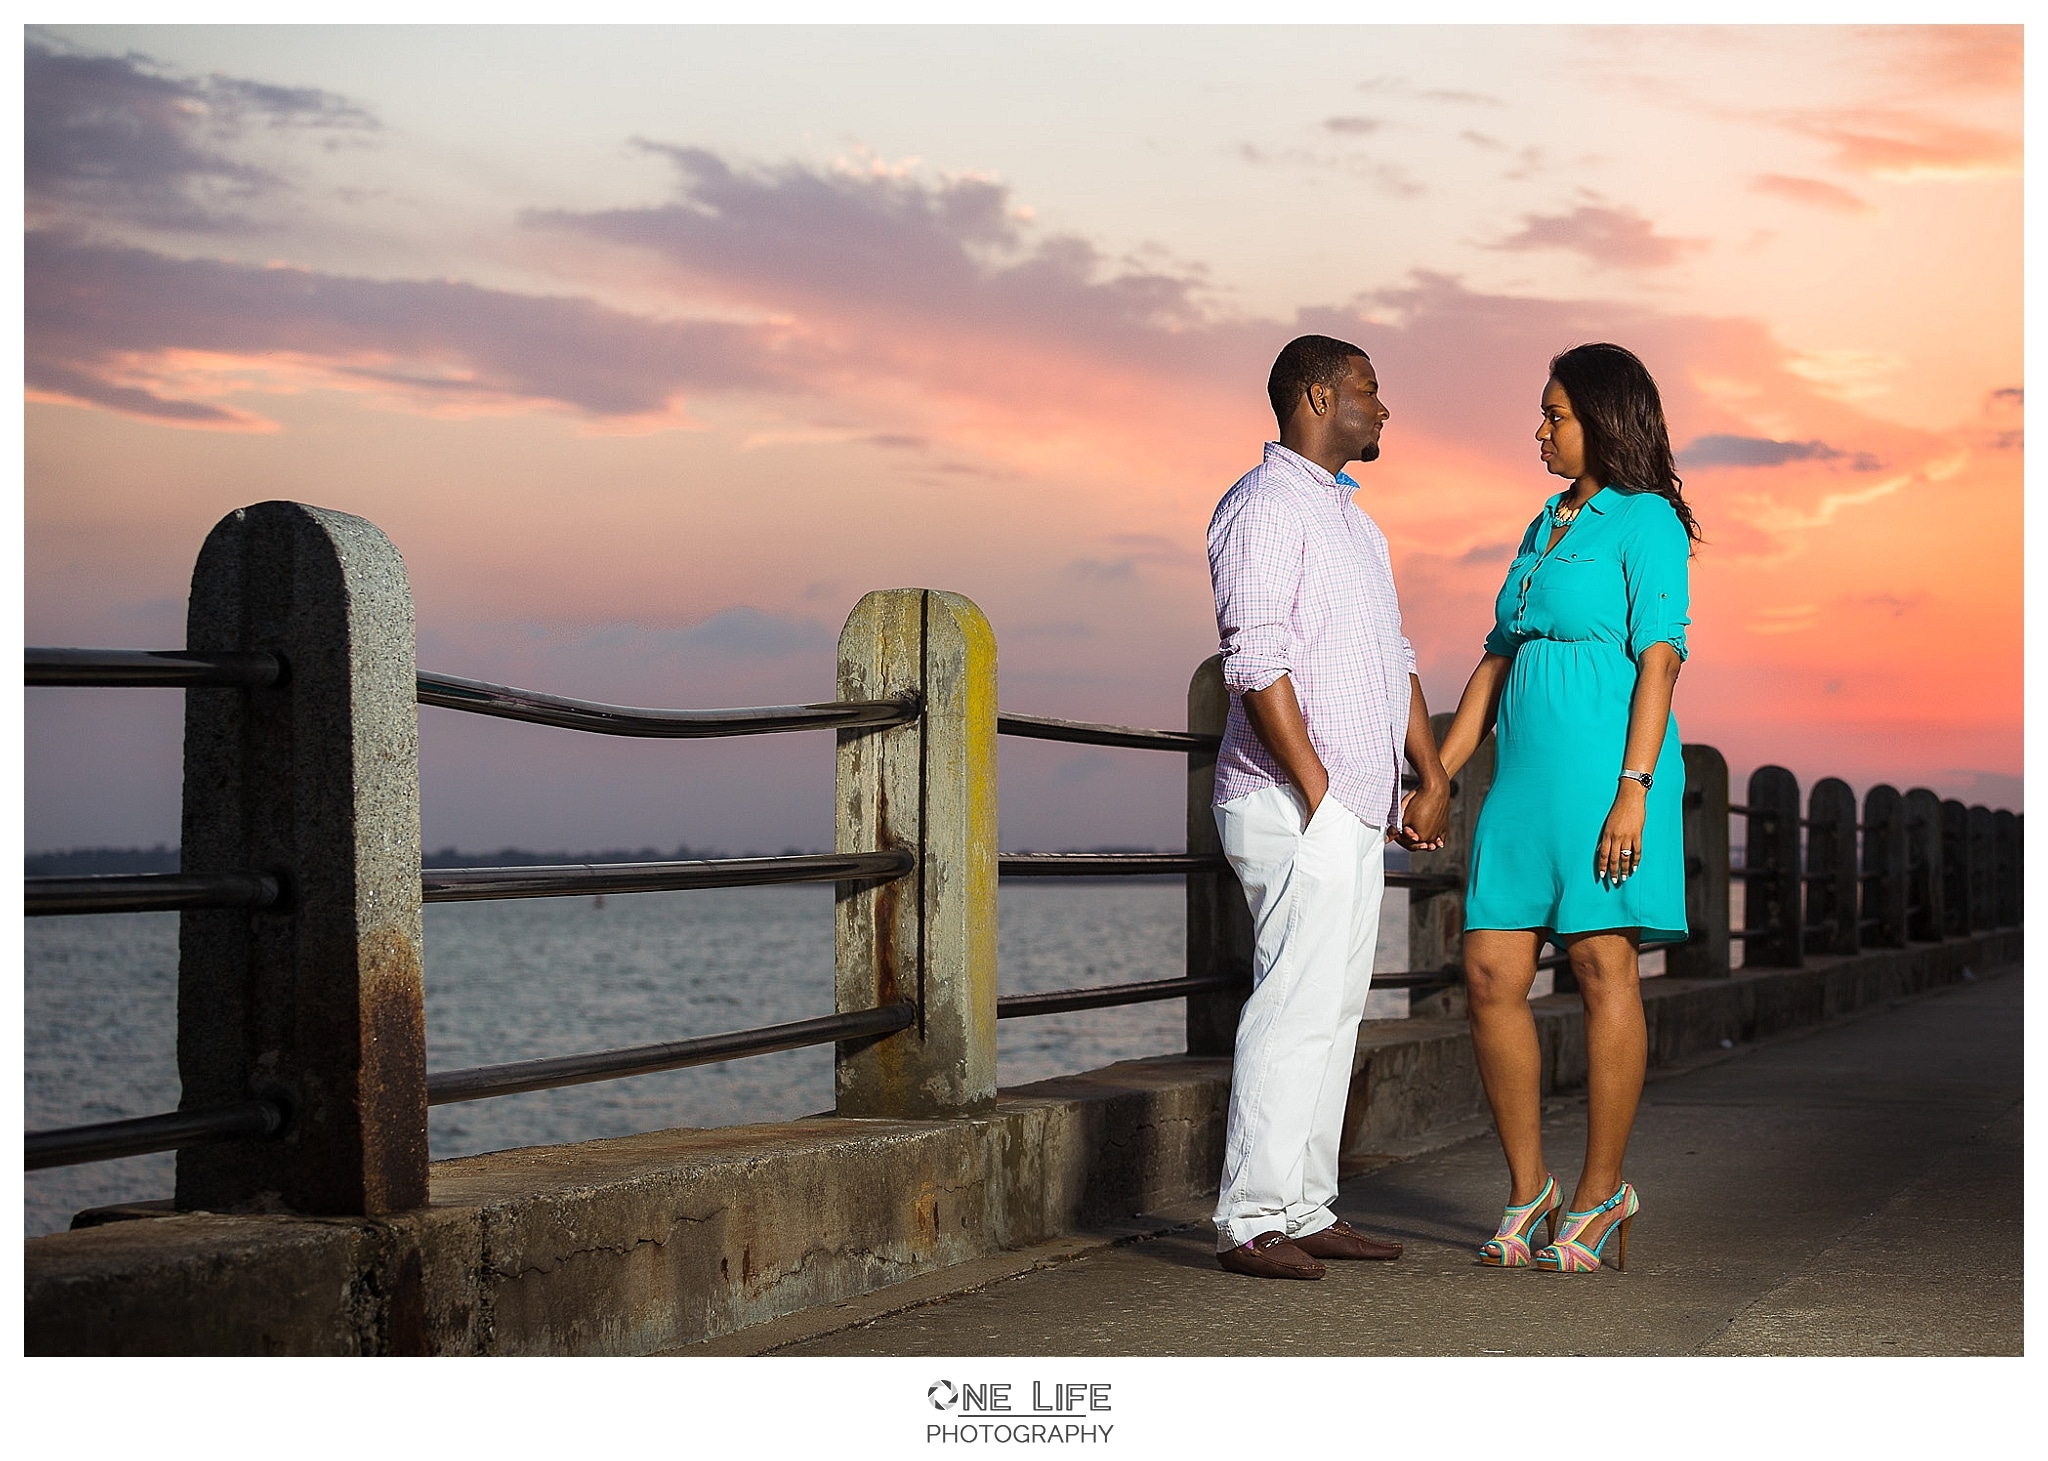 Beautiful sunset on the Engagement session by One Life photography